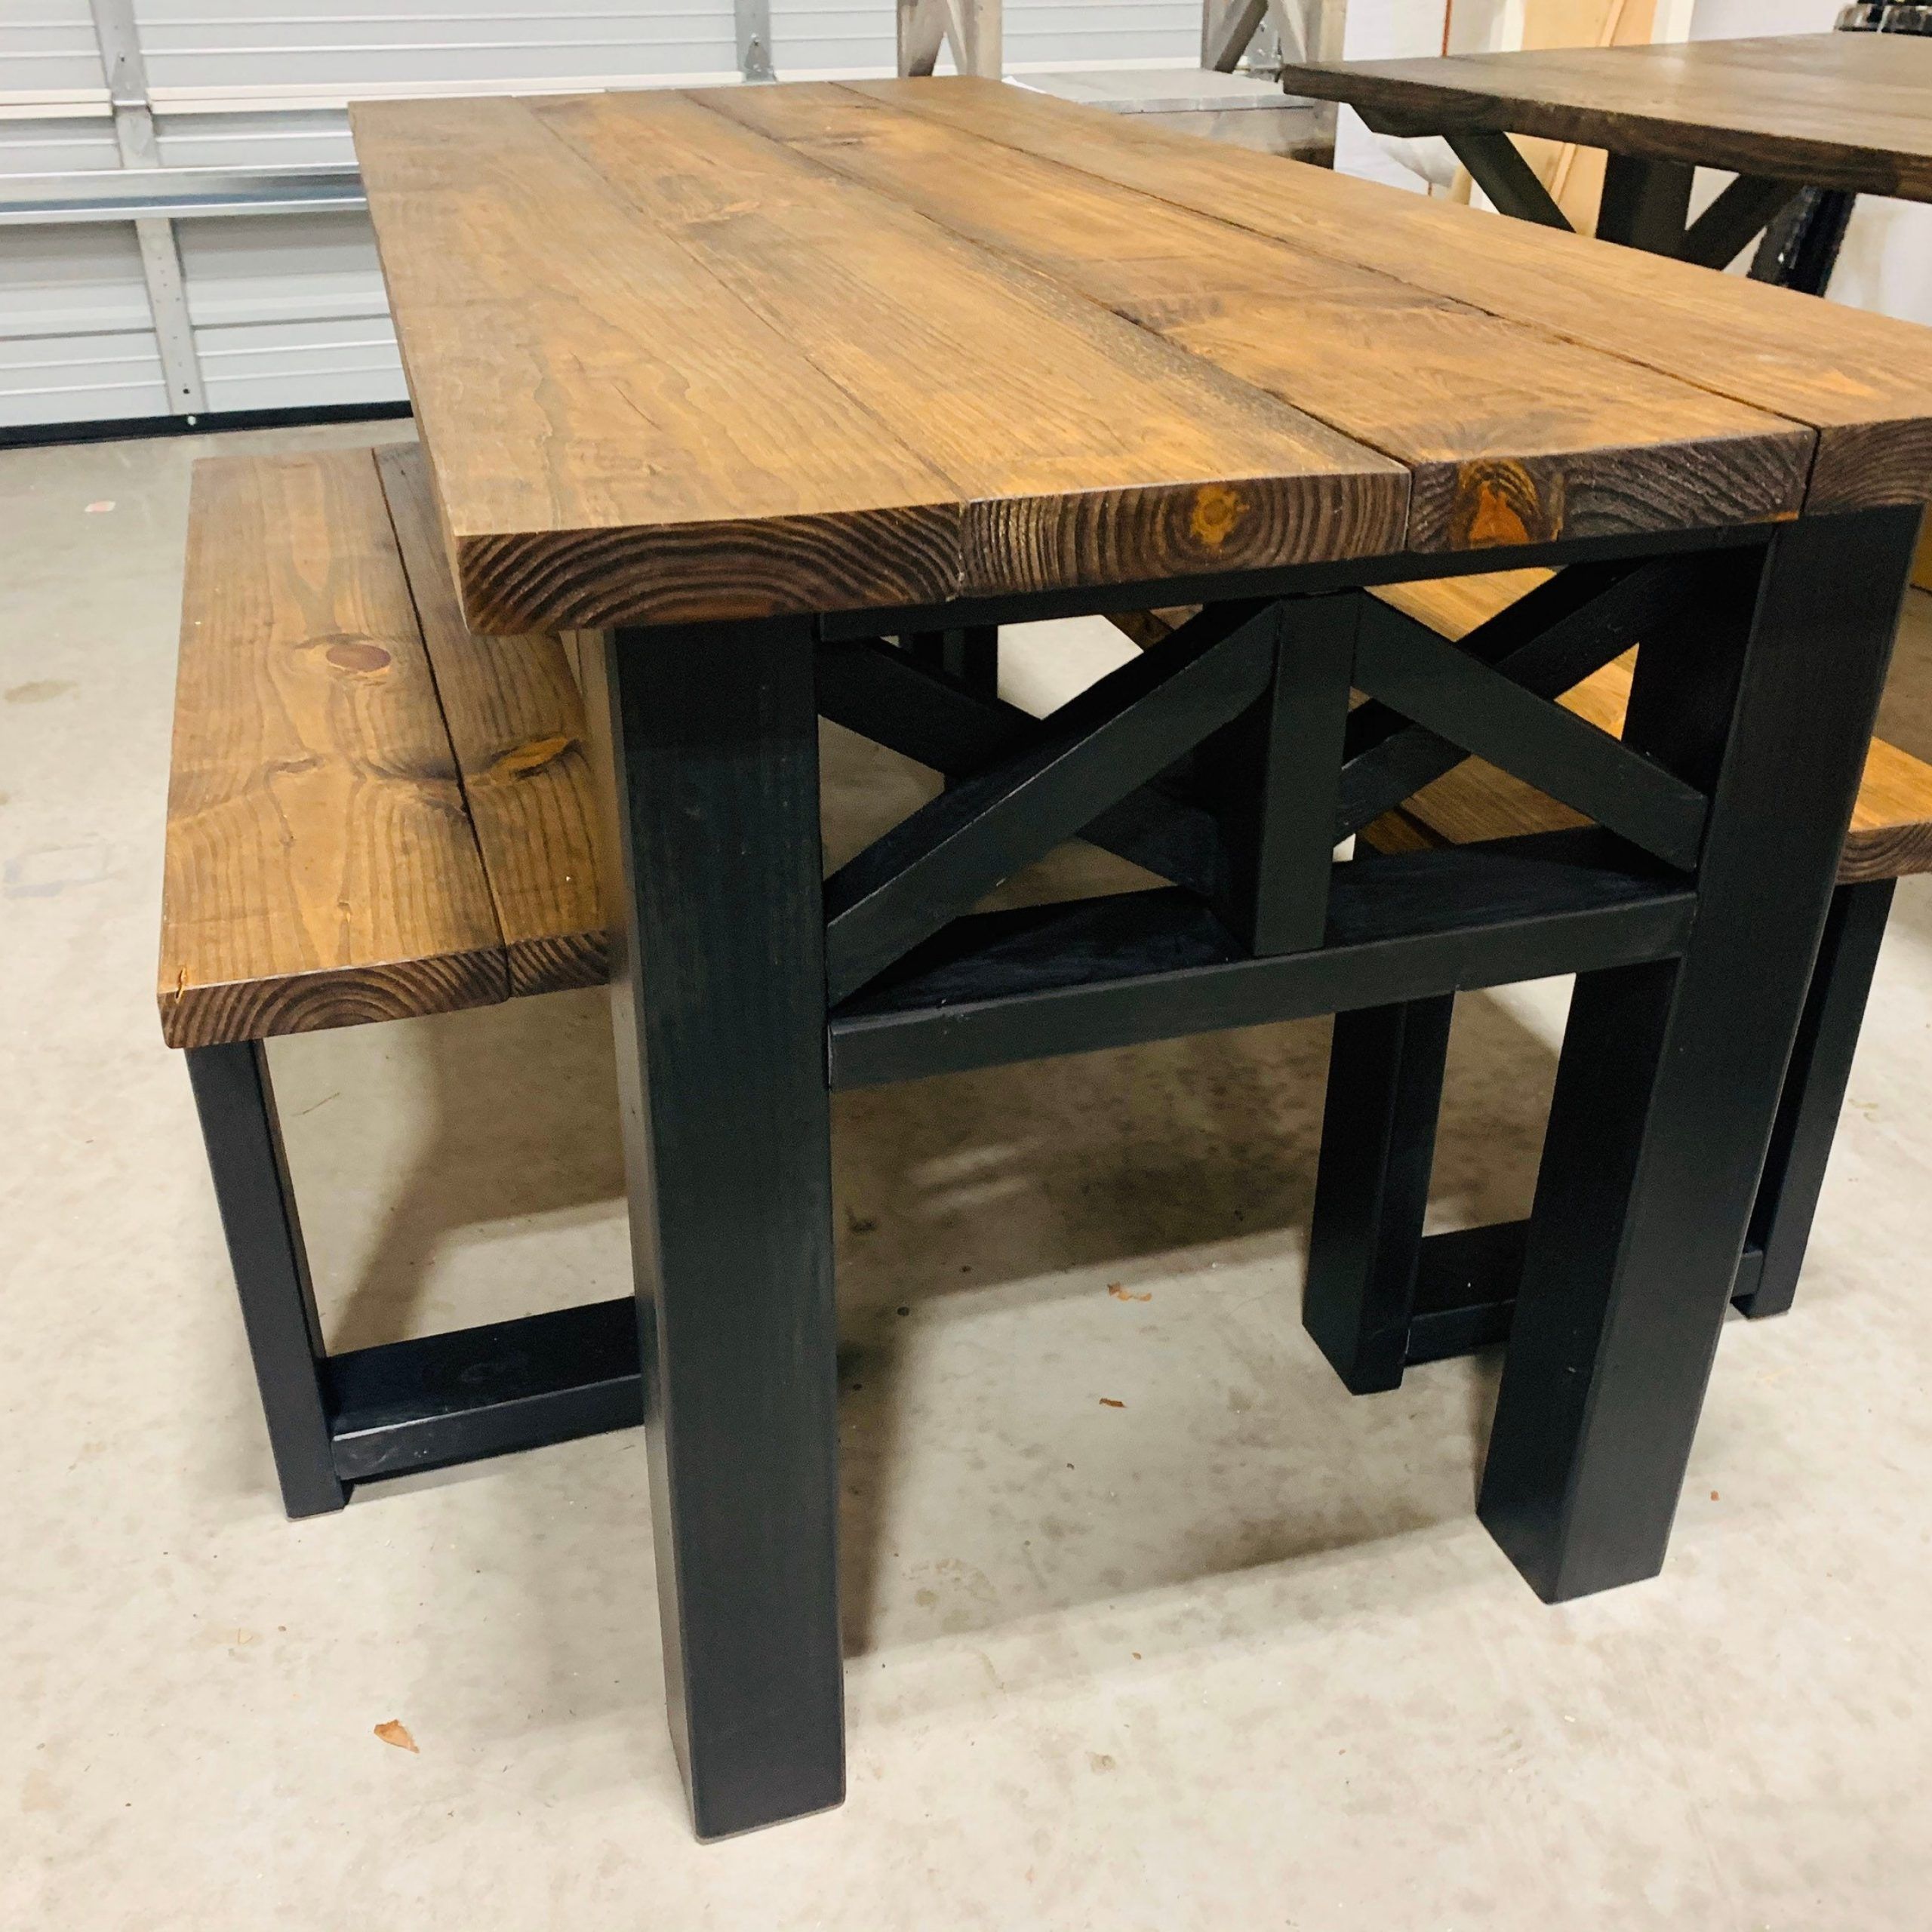 Rustic Wooden Farmhouse Table Set With Provincial Brown Top And True Throughout Wood And Dark Bronze Criss Cross Desks (View 12 of 15)